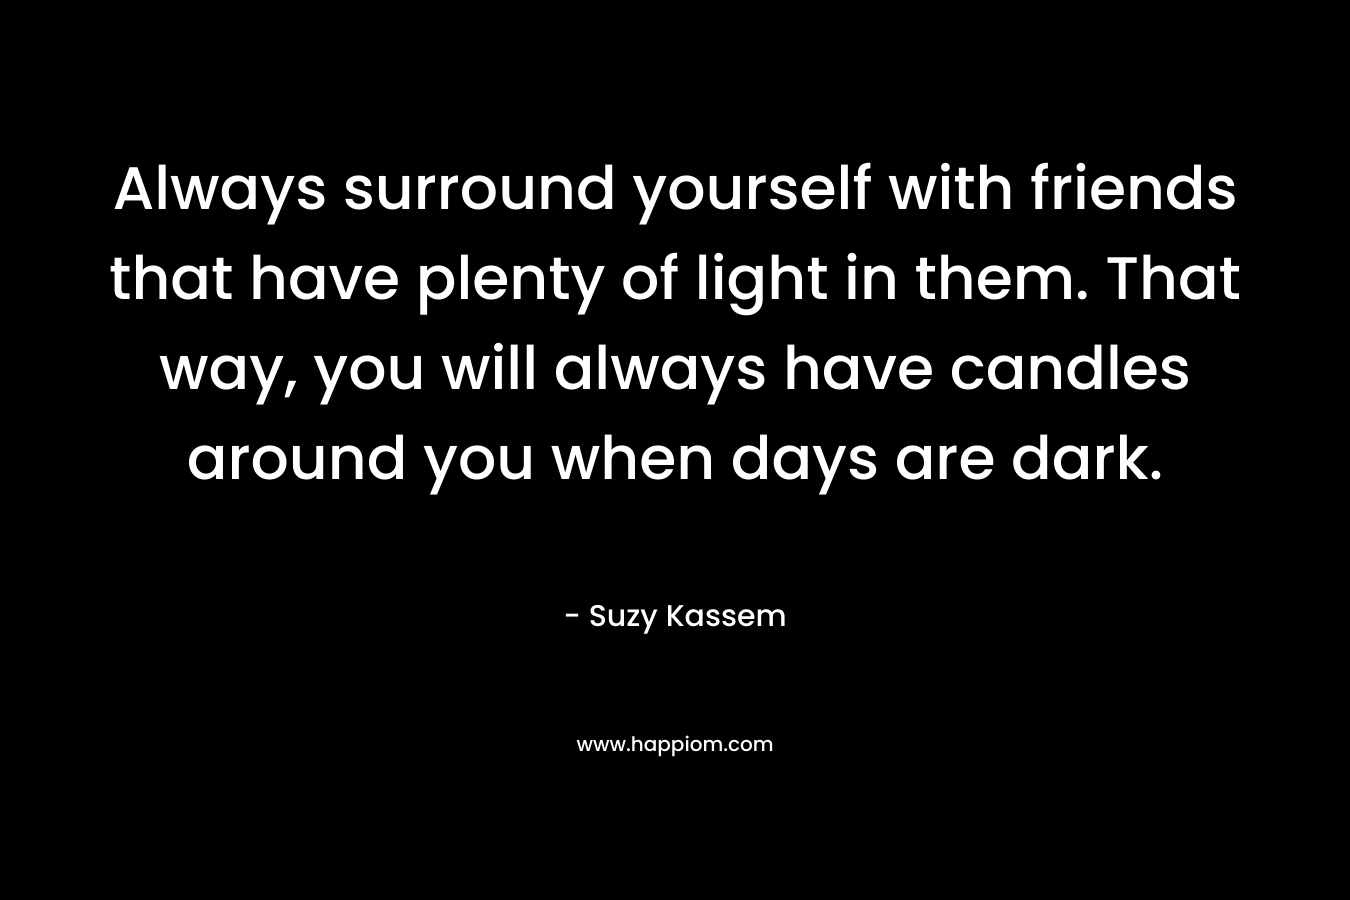 Always surround yourself with friends that have plenty of light in them. That way, you will always have candles around you when days are dark. – Suzy Kassem